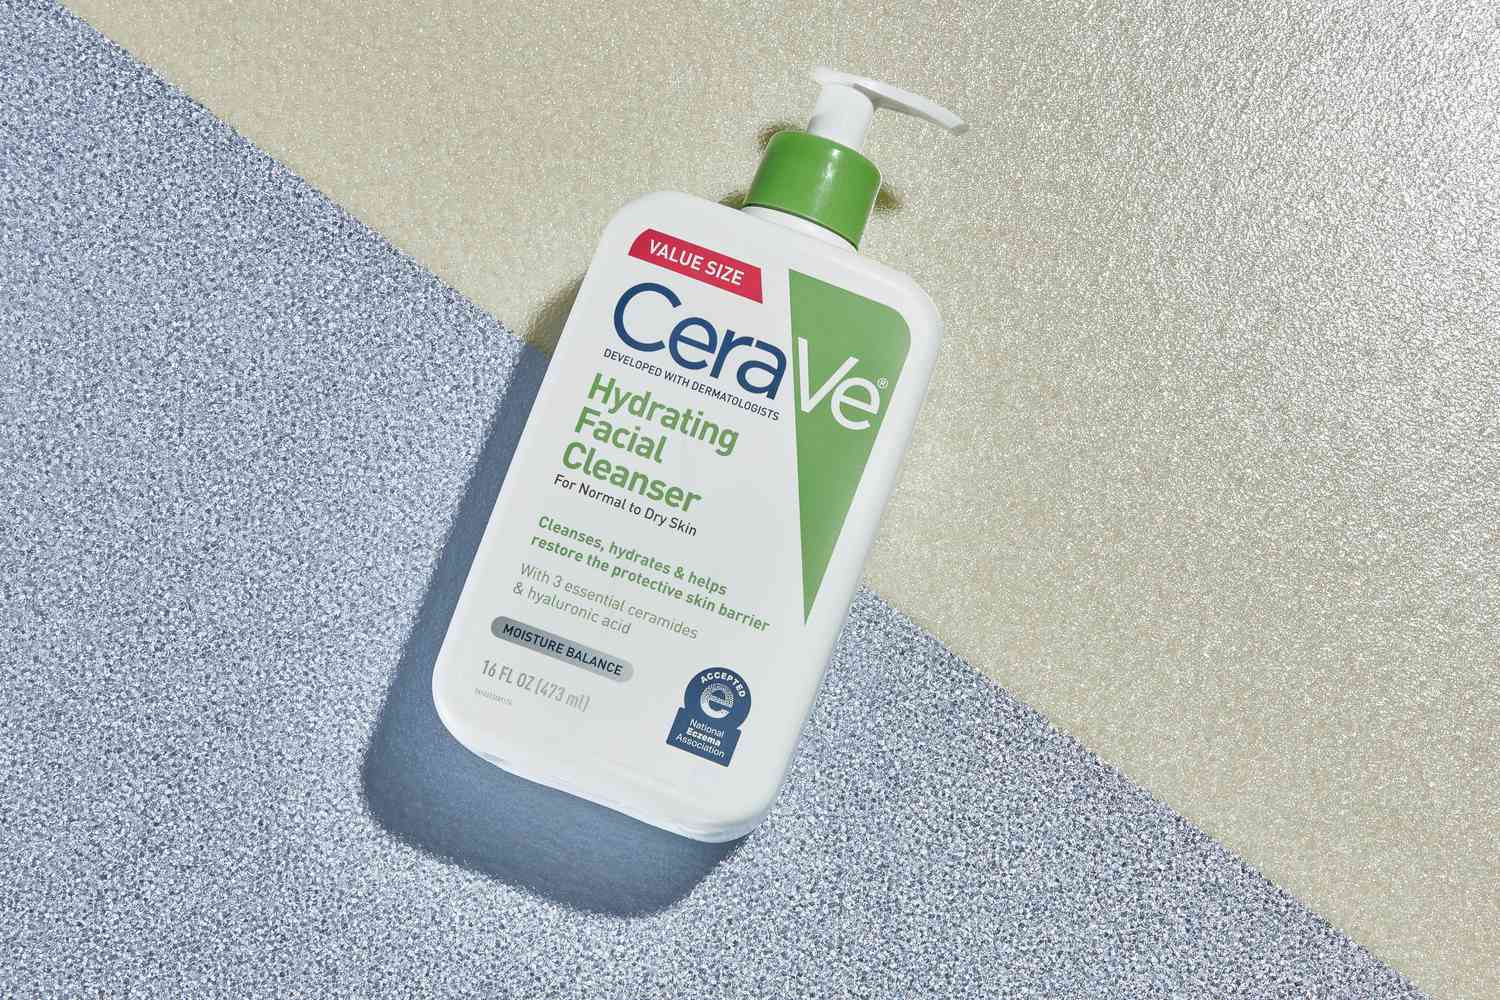 CeraVe, Foaming Cleanser Normal to Oily Skin  All About Skin Doha Skincare Qatar Beauty Cosmetics Available in Qatar Available in Qatar Store all about skin doha qatar skincare cosmetics beauty